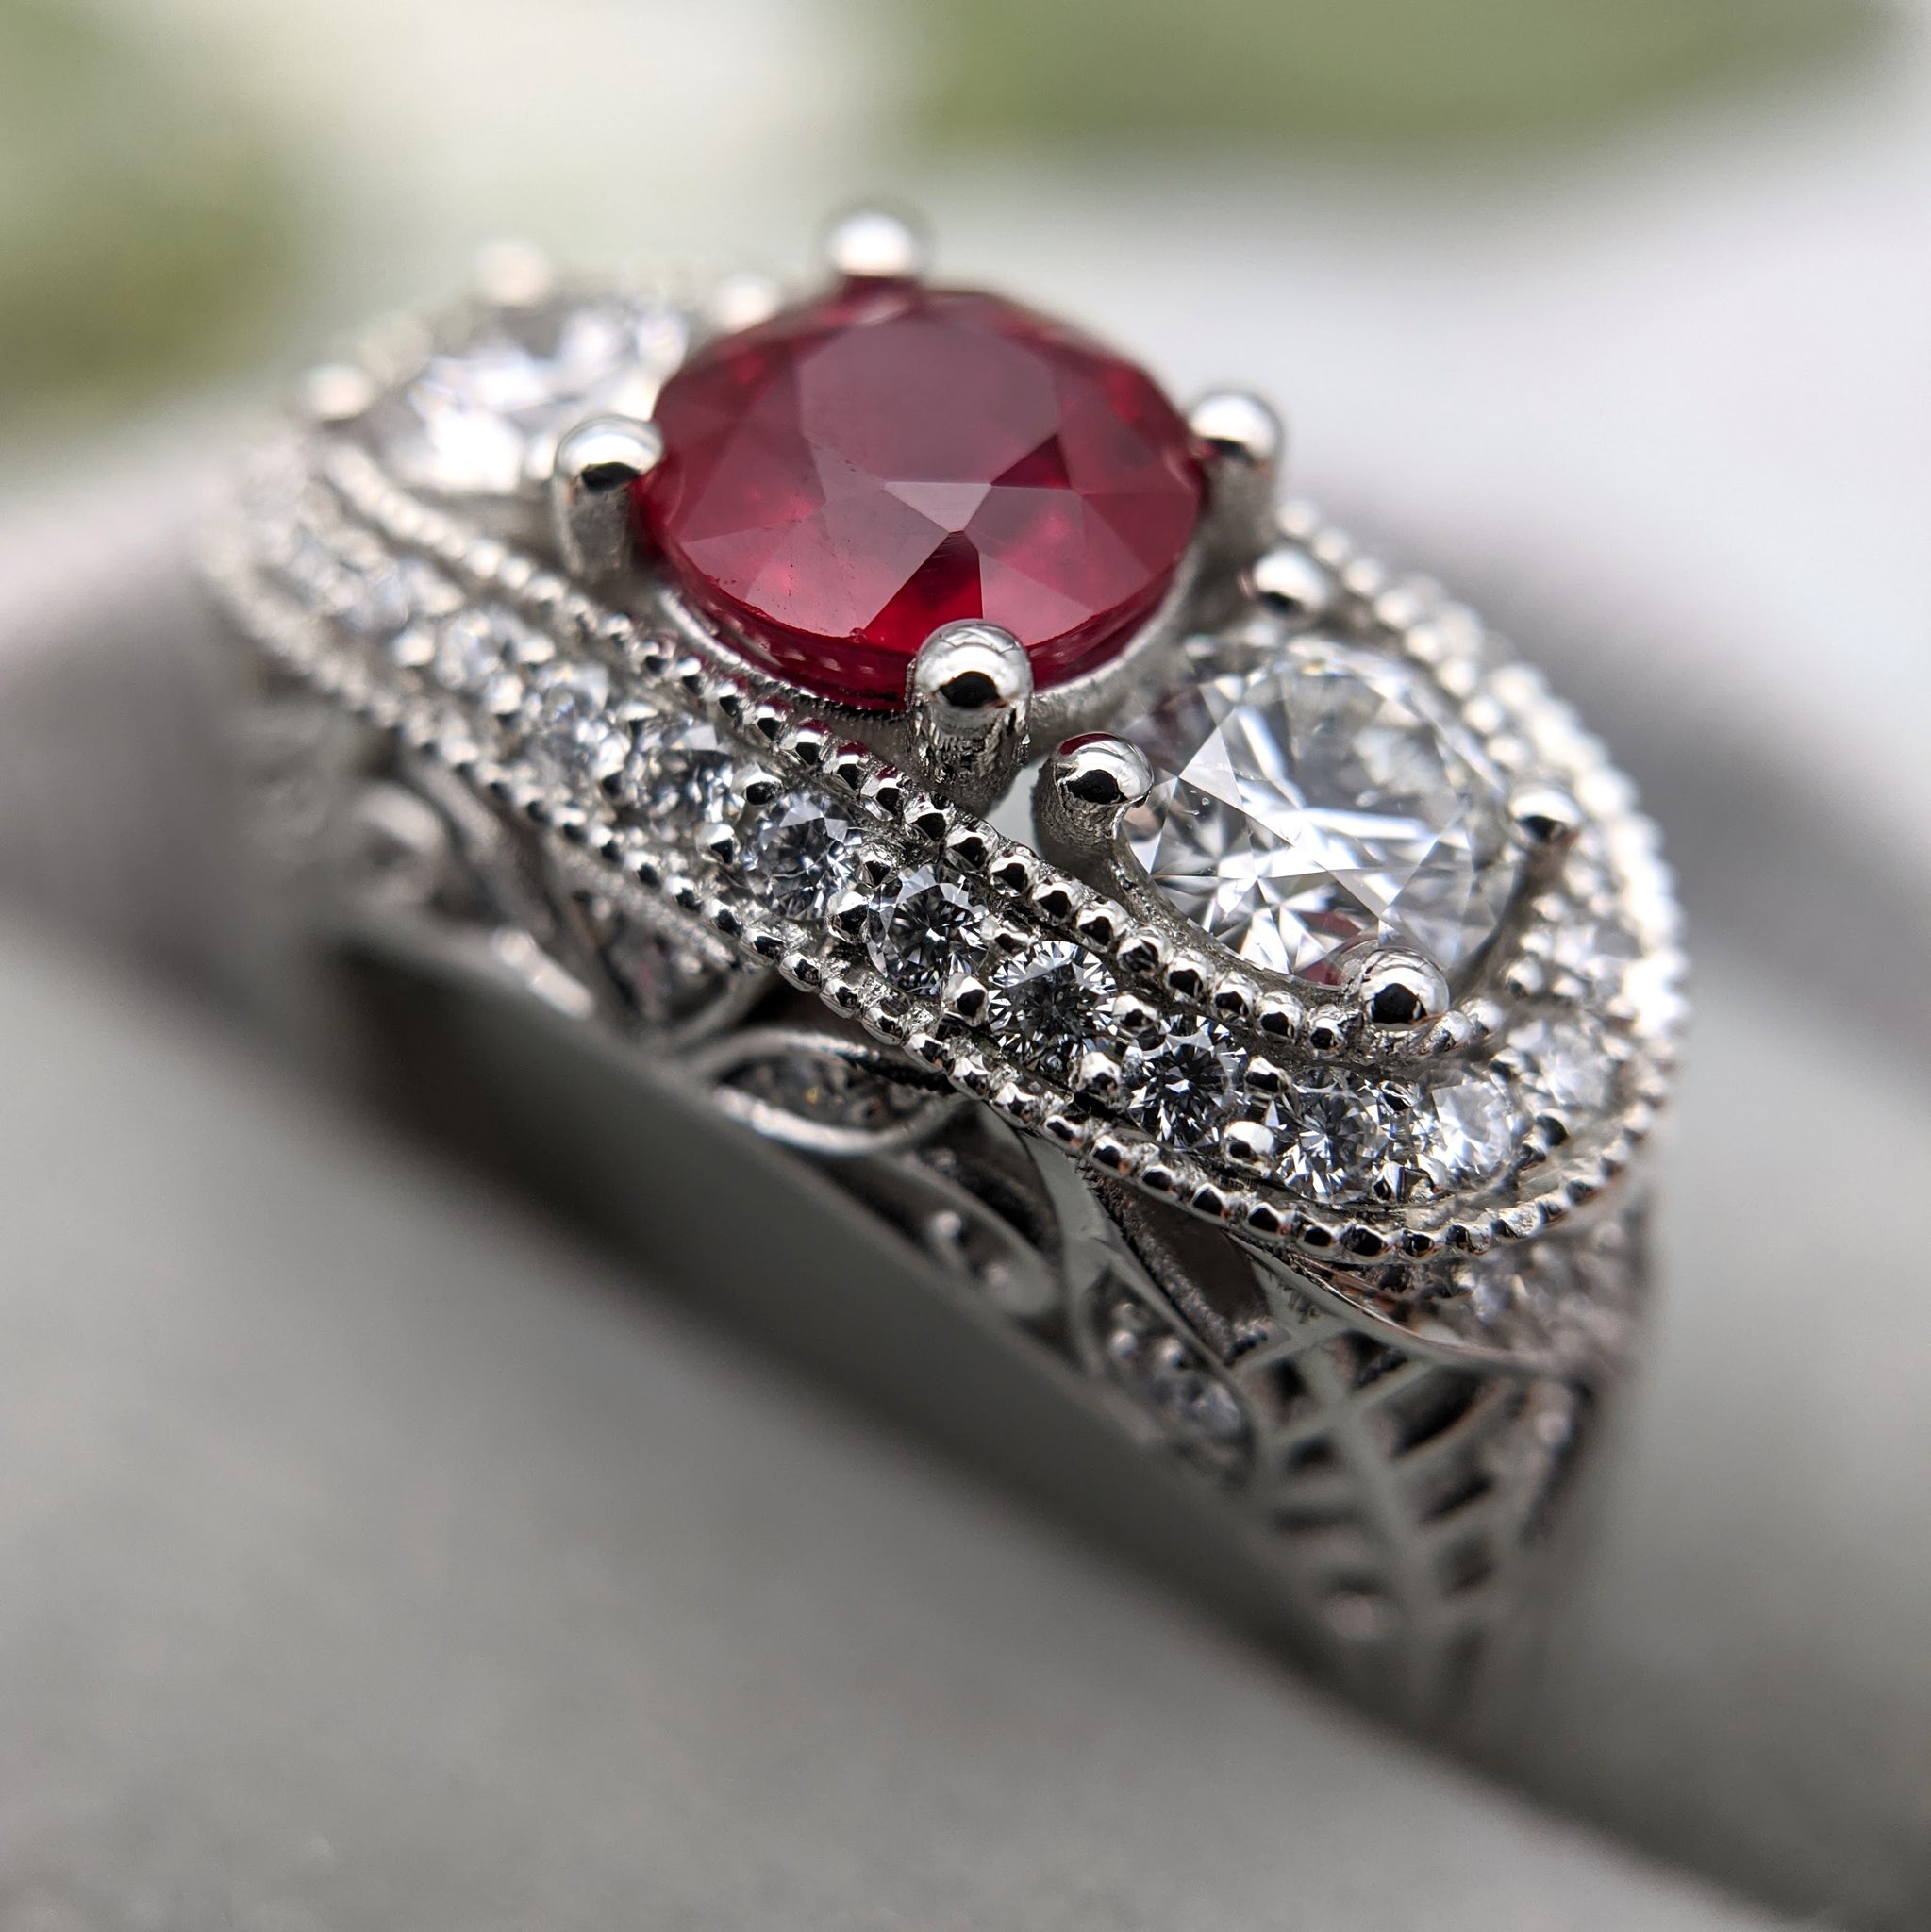 40th Anniversary Ruby Ring with Vintage Inspired Filigree